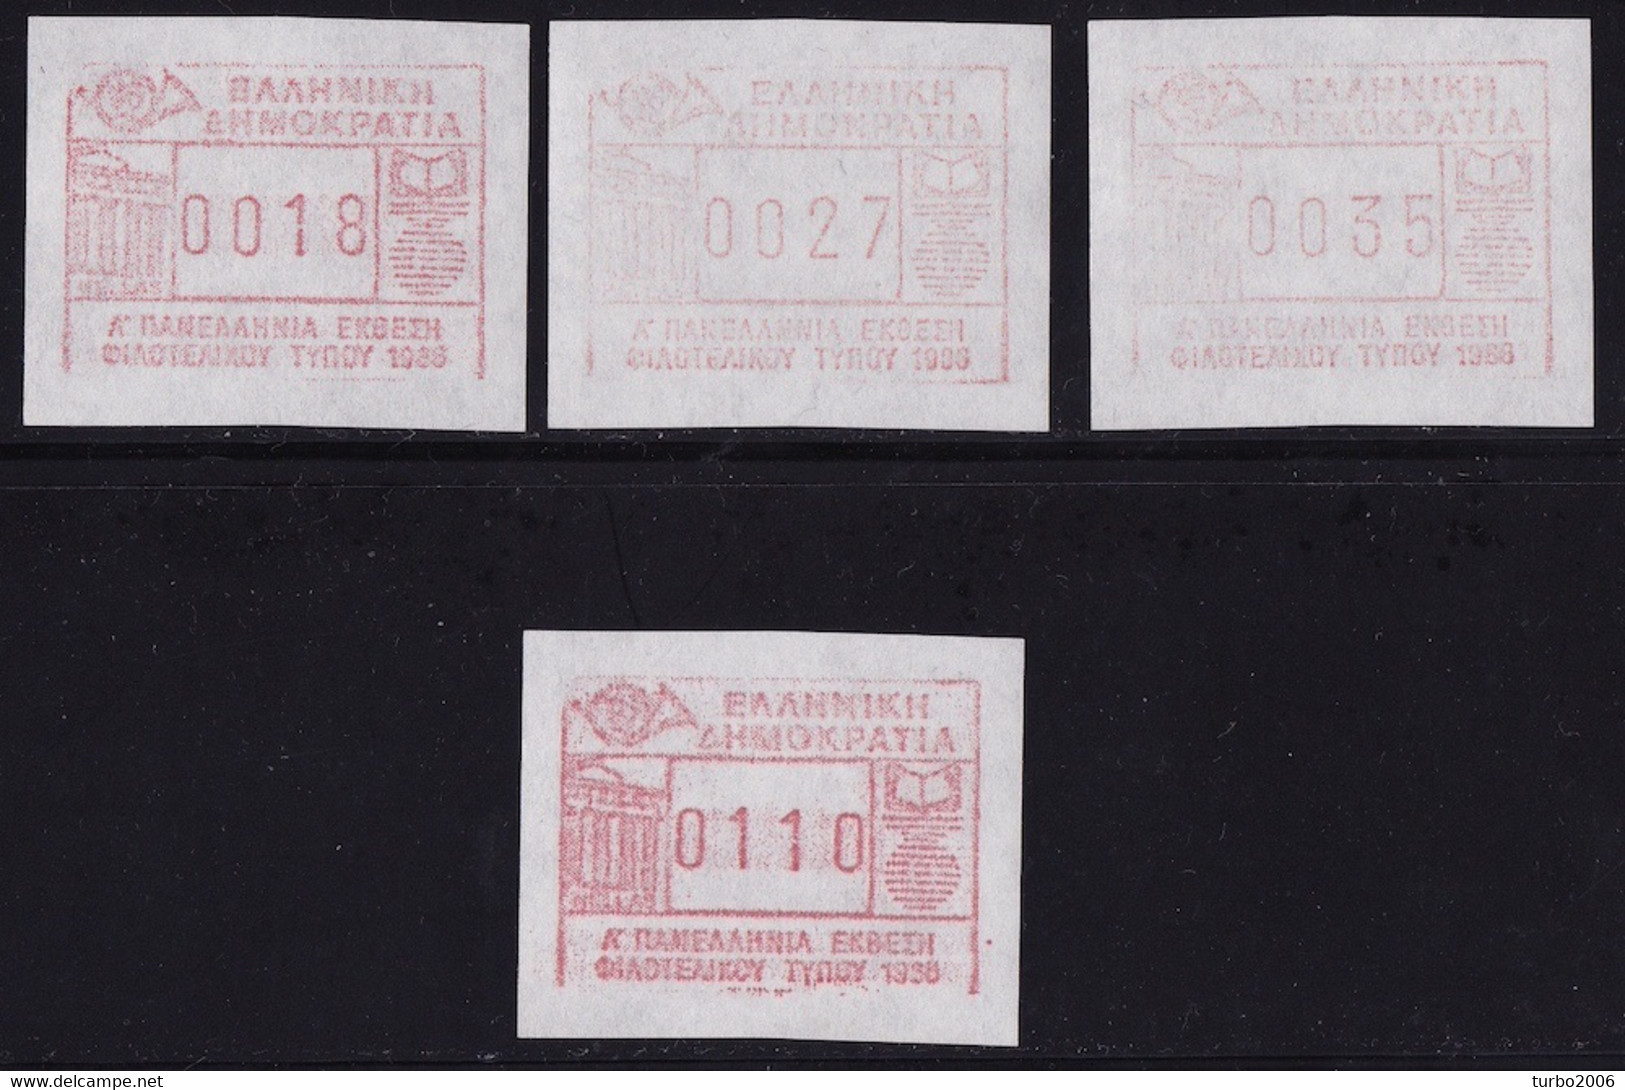 GREECE 1986 FRAMA Stamps For Panhelenic Literature Exhabition Set Of 18-27-35 DR + 110 Dr MNH Hellas M 12 - Machine Labels [ATM]